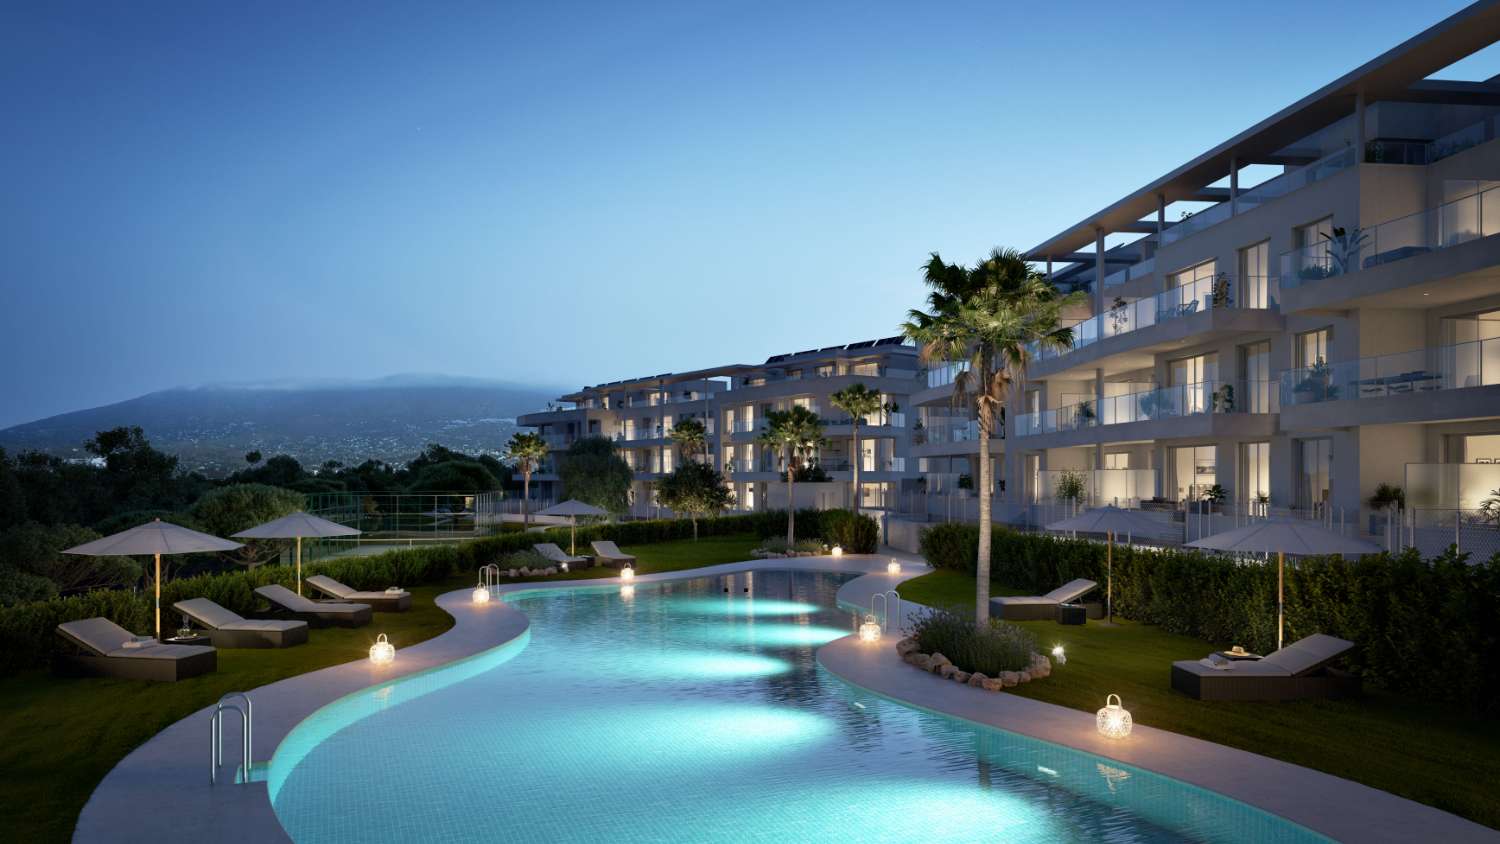 Excellent apartments with sea views in Mijas Costa!